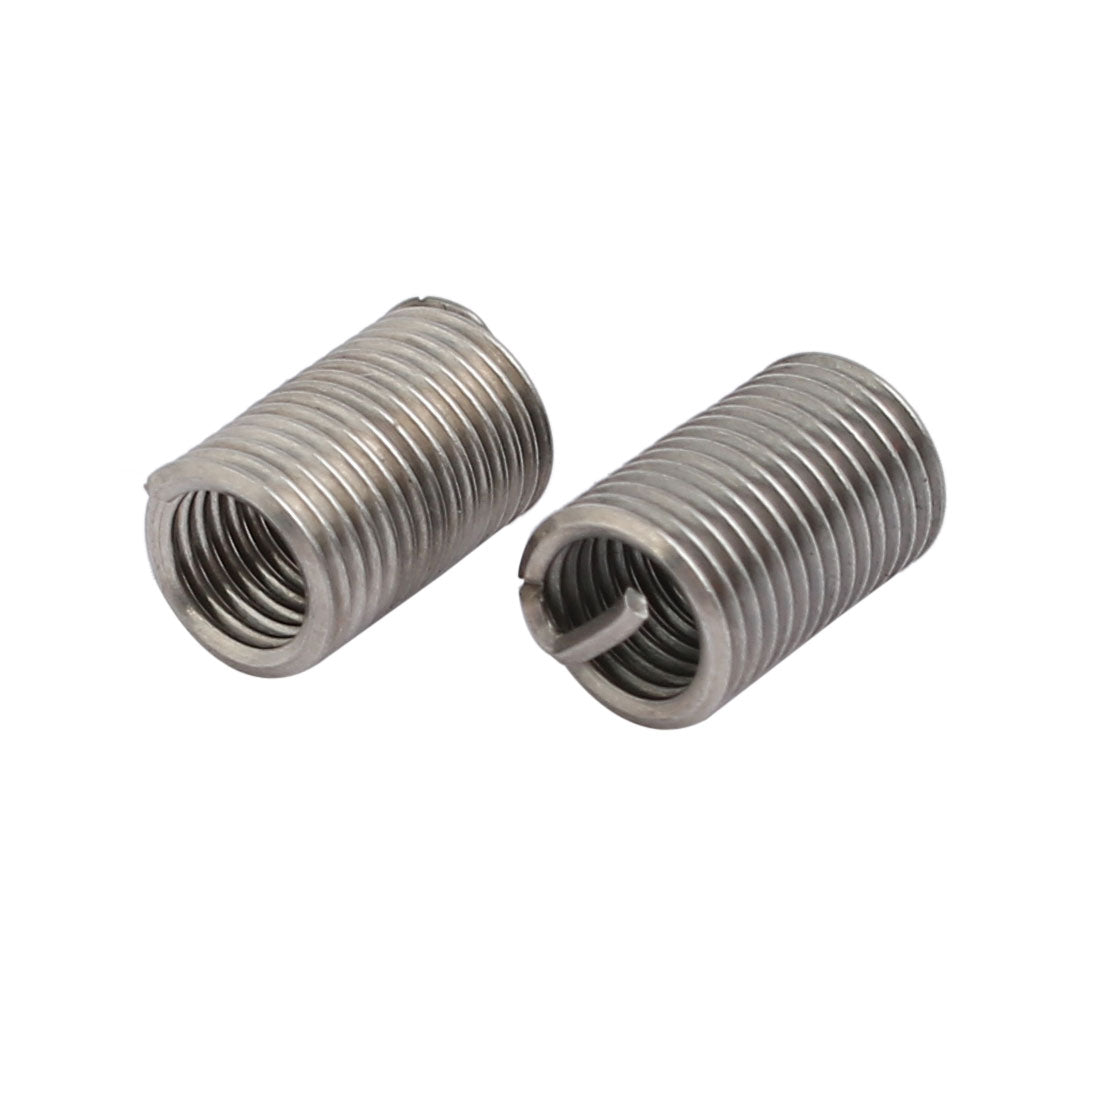 uxcell Uxcell M5x0.8mmx15mm 304 Stainless Steel Helical Coil Wire Thread Insert 25pcs